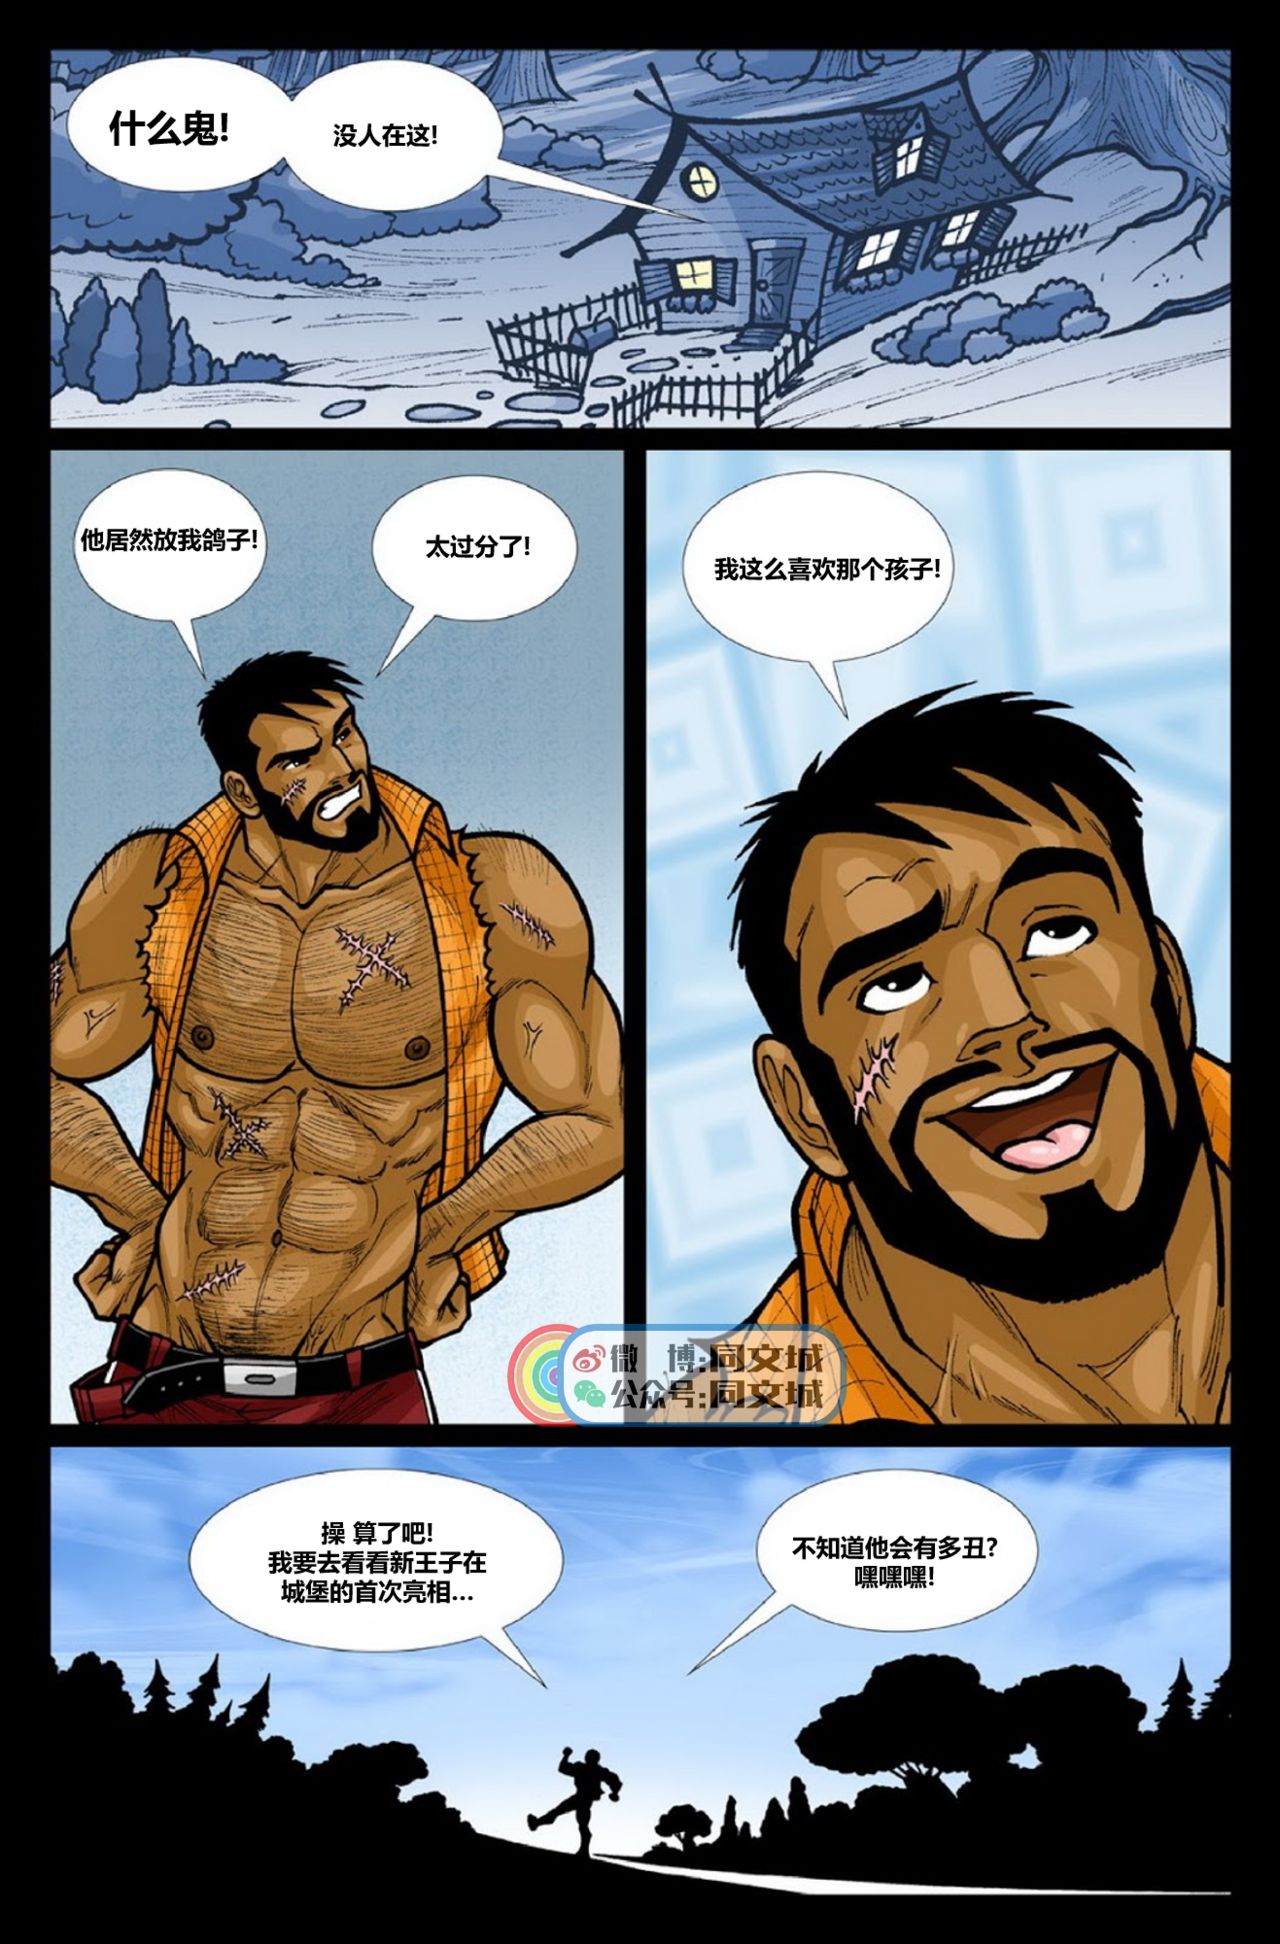 David Cantero _Sleeping Bear A Gay Tale（Chinese） page 18 full